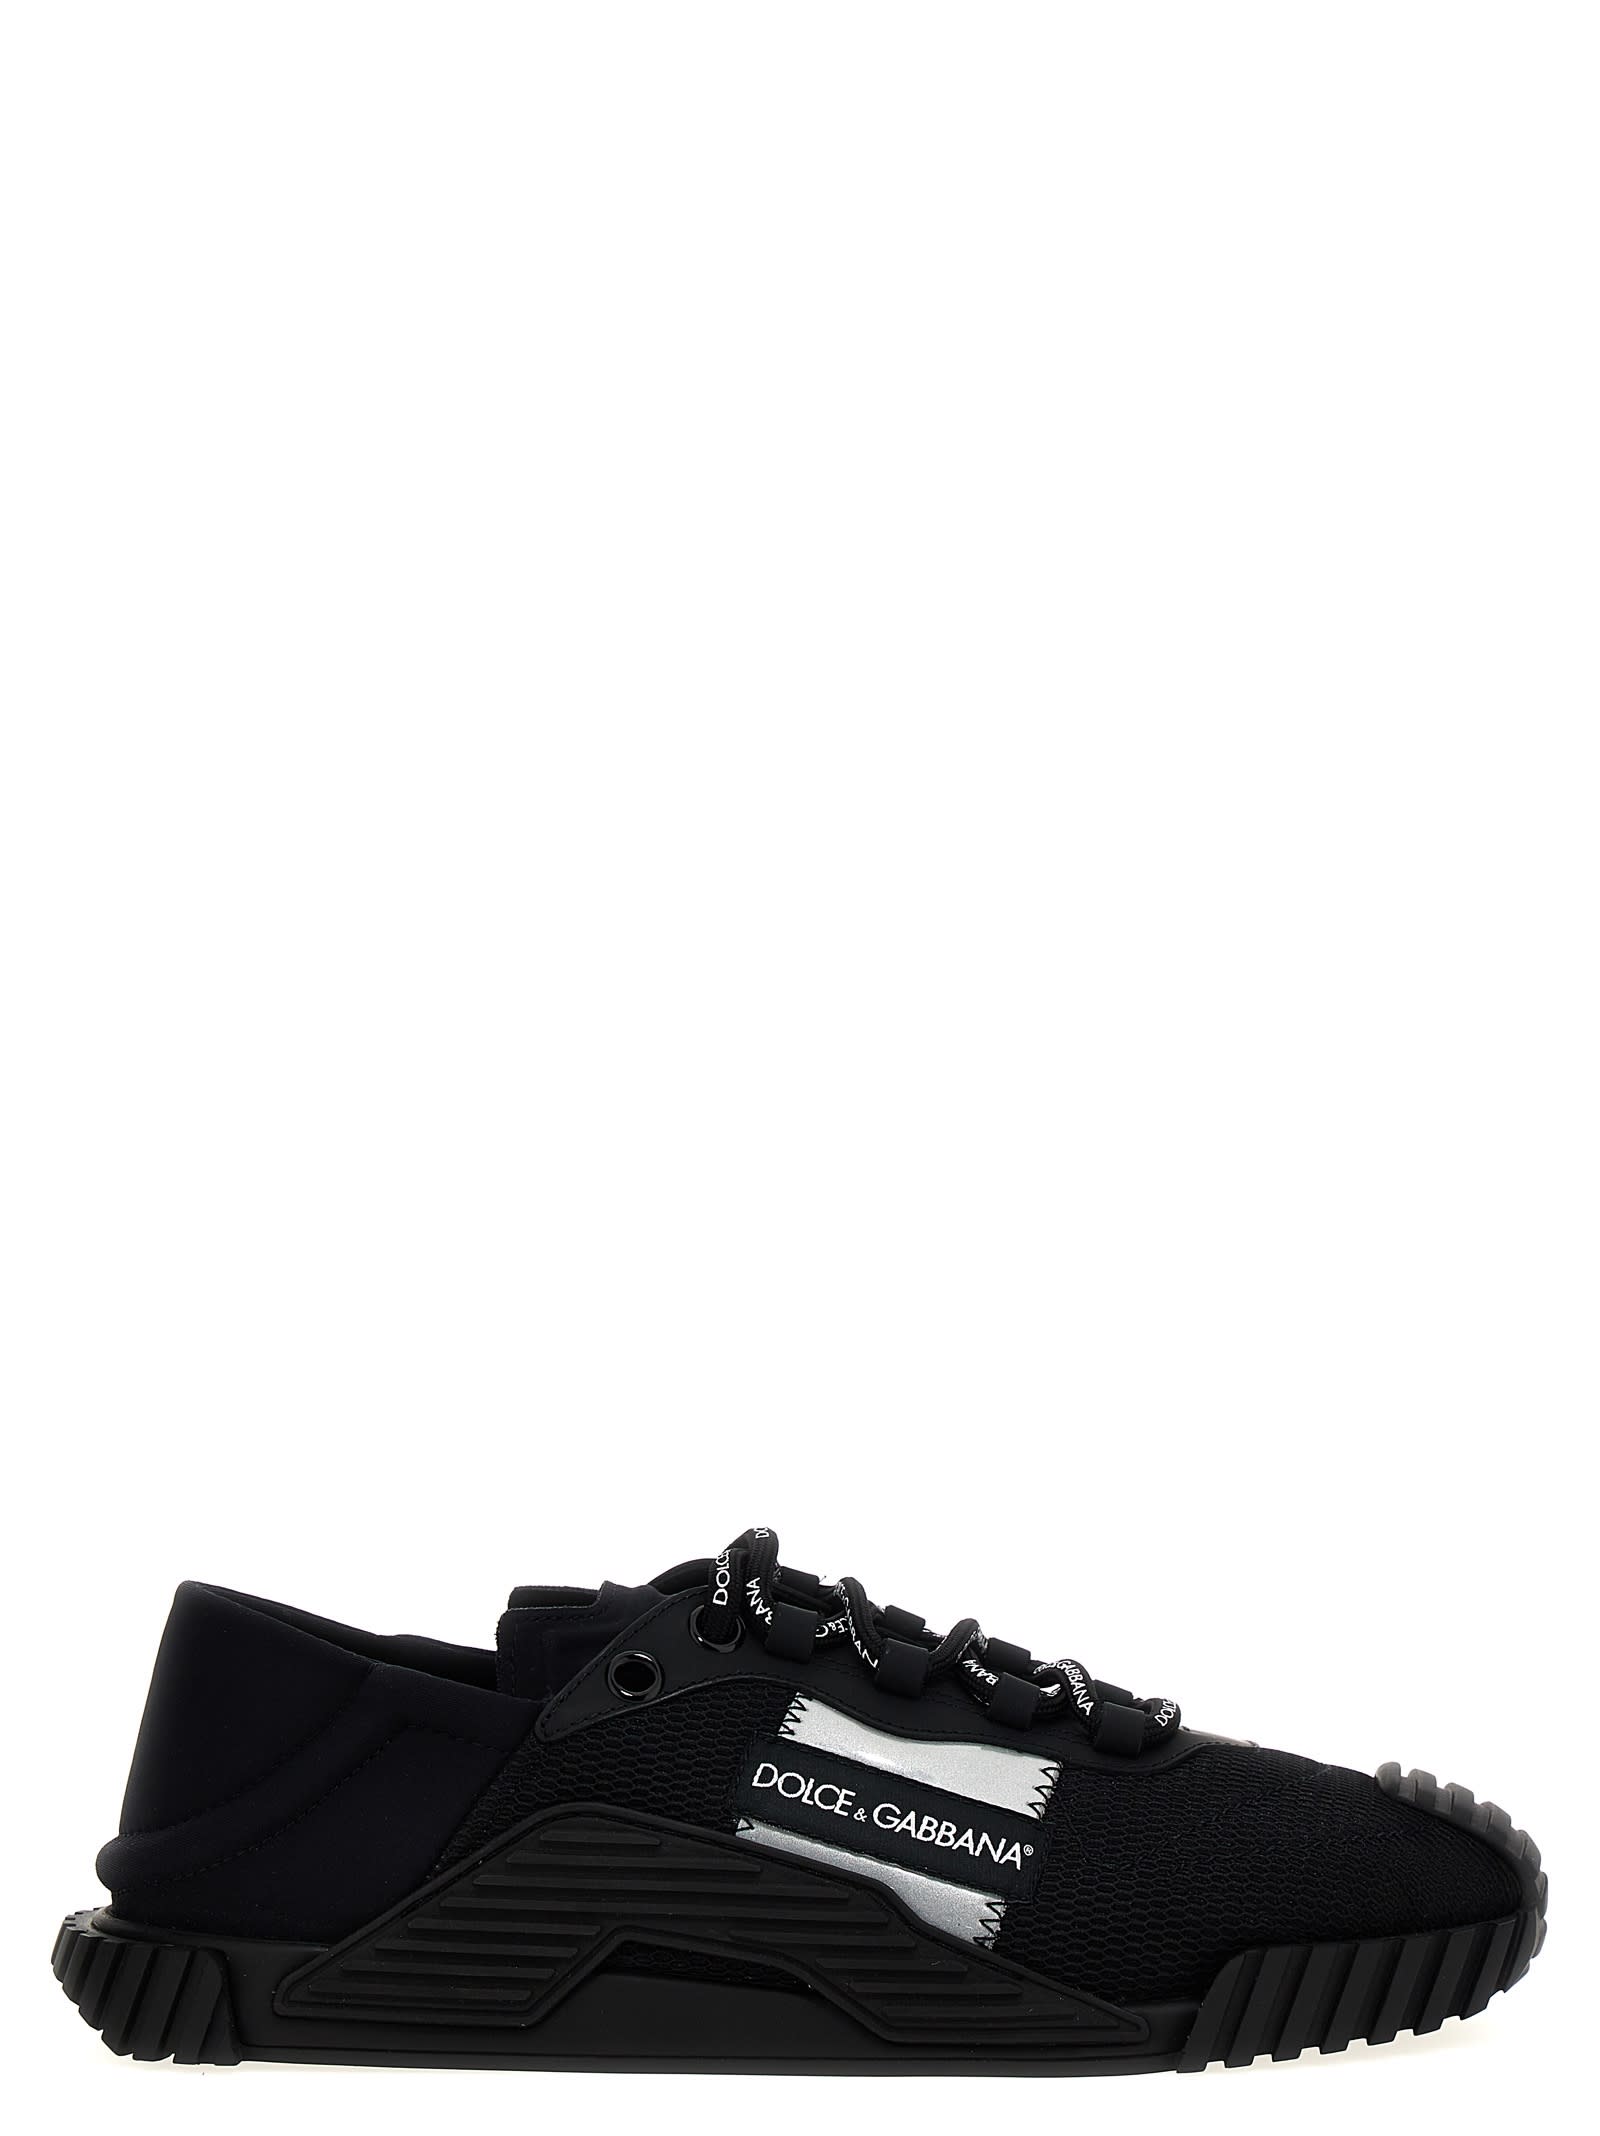 Dolce & Gabbana Ns1 Trainers In Black